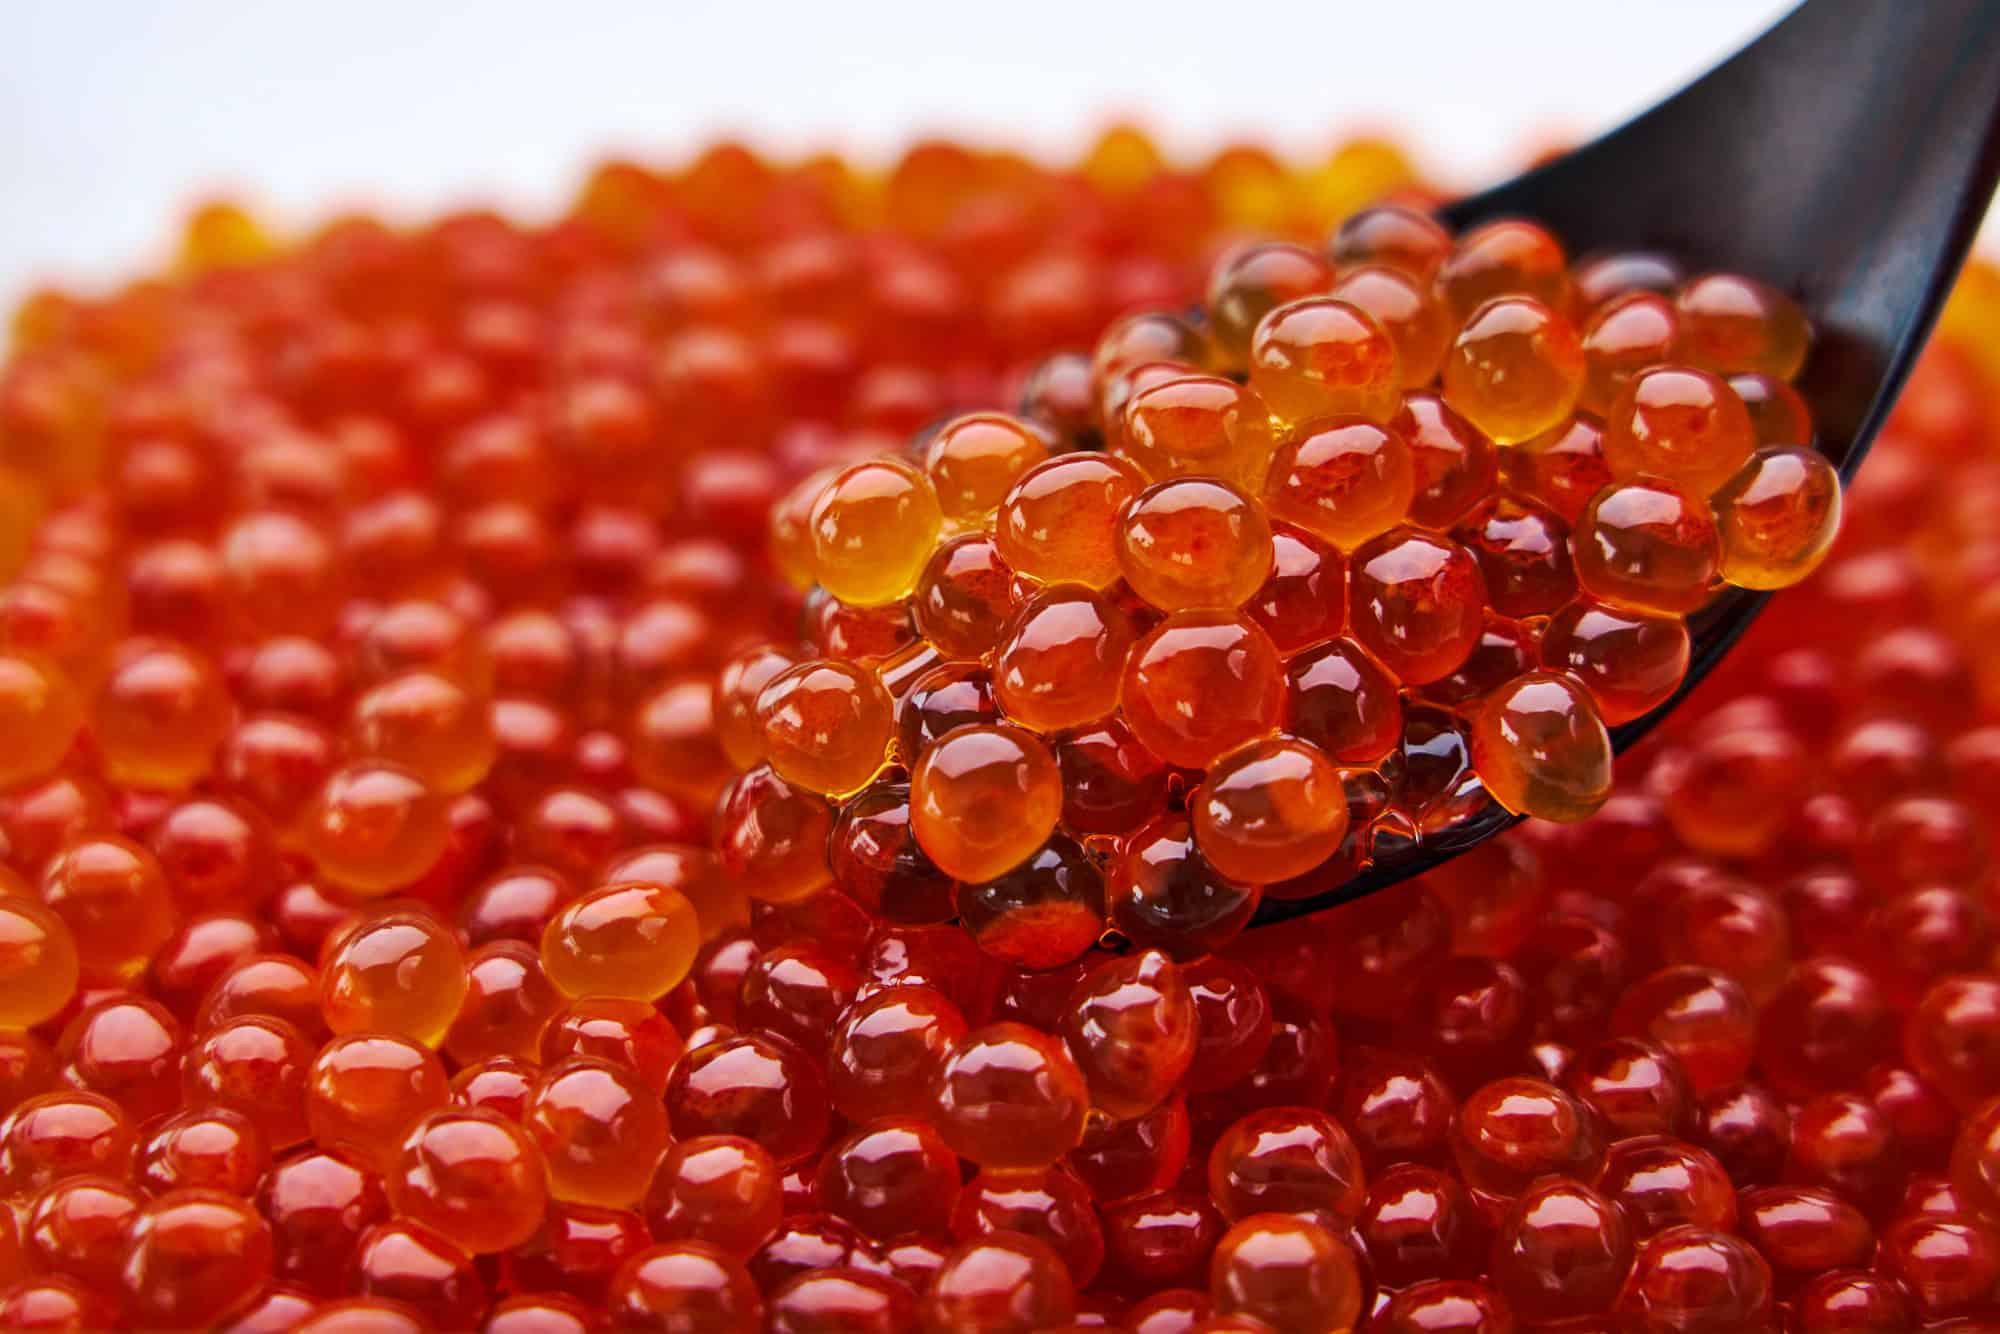 Close-up of ikura salmon roe glistening on a wooden spoon against a soft-focused background, showcasing its vibrant orange color and texture.